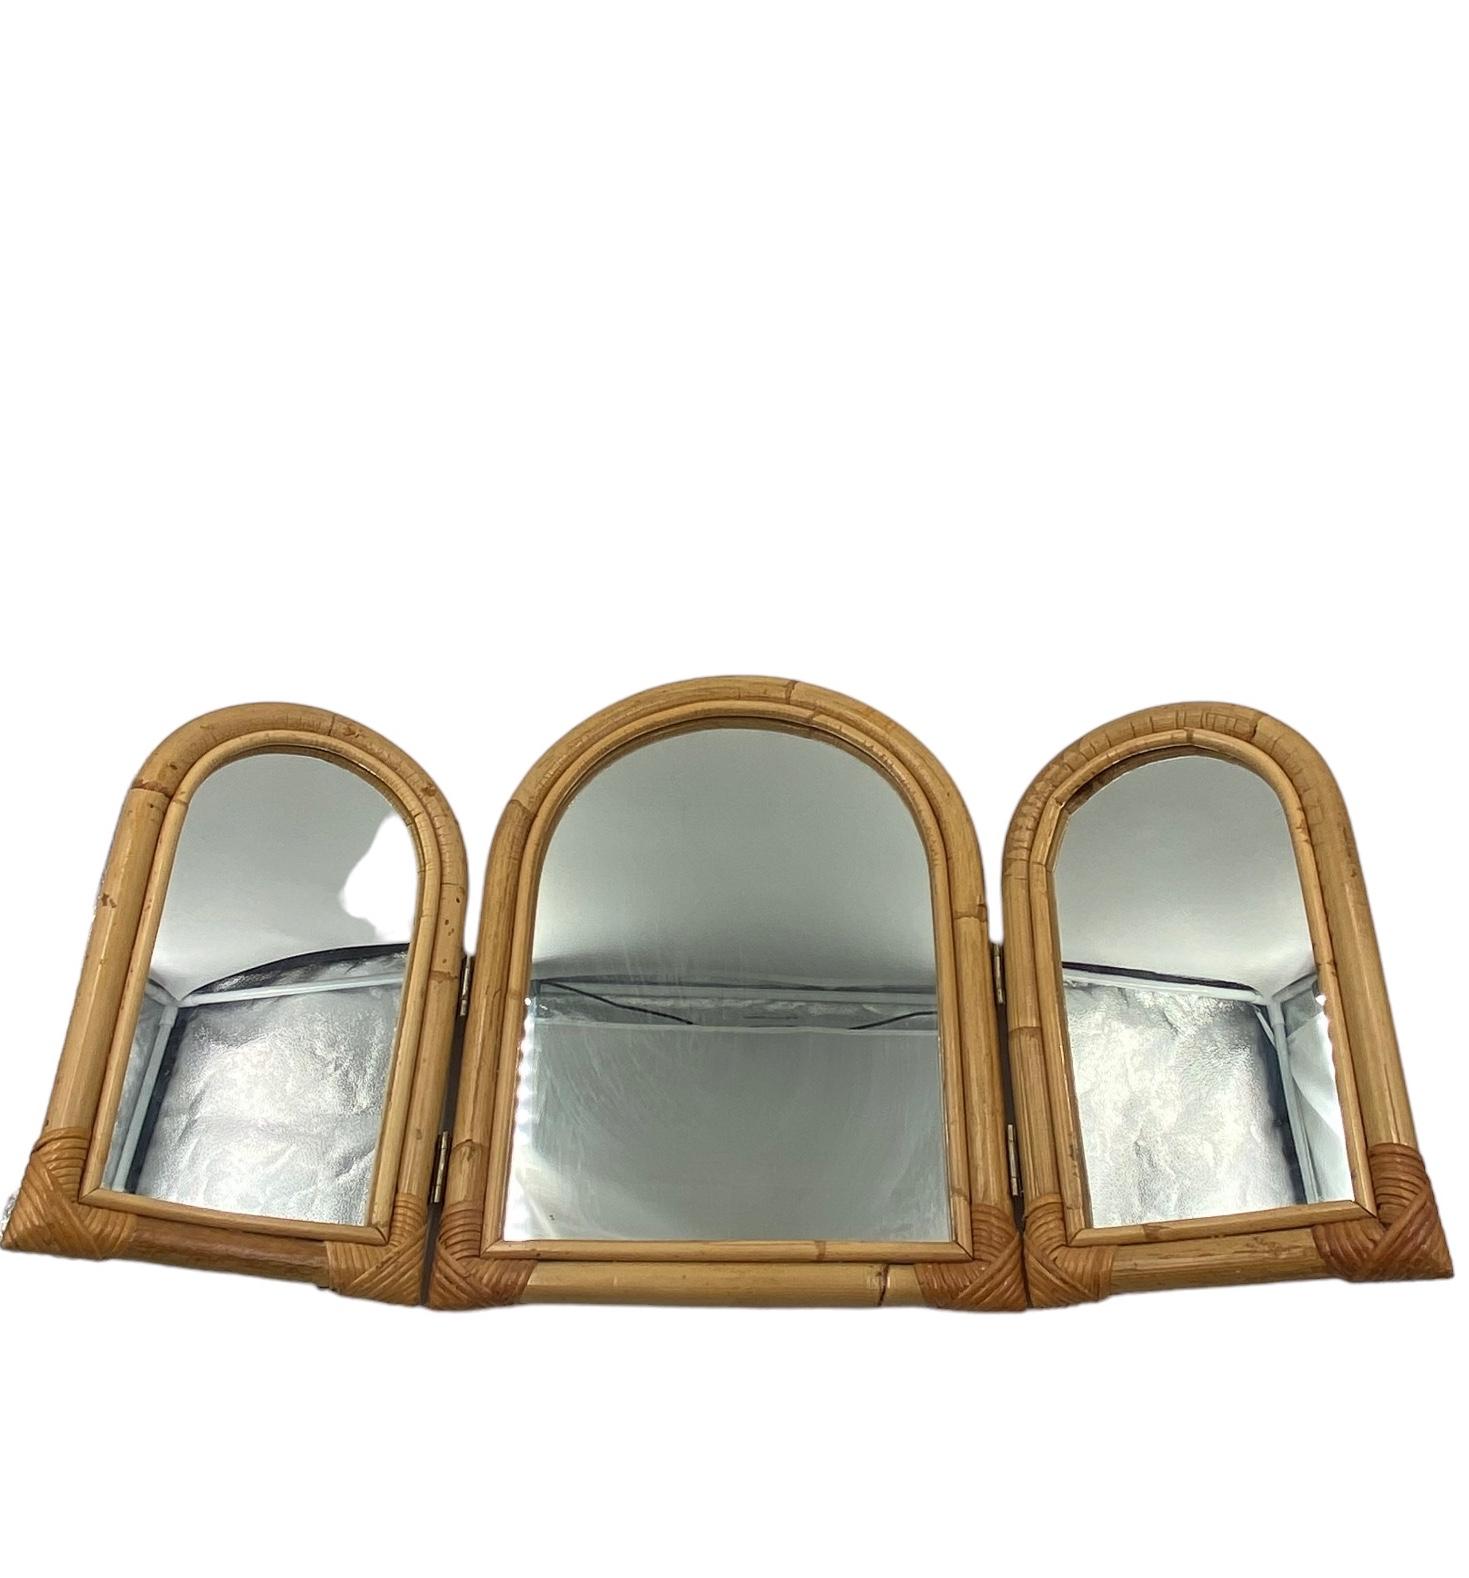 Bamboo three flaps table mirror / vanity, Italy 1960s For Sale 3